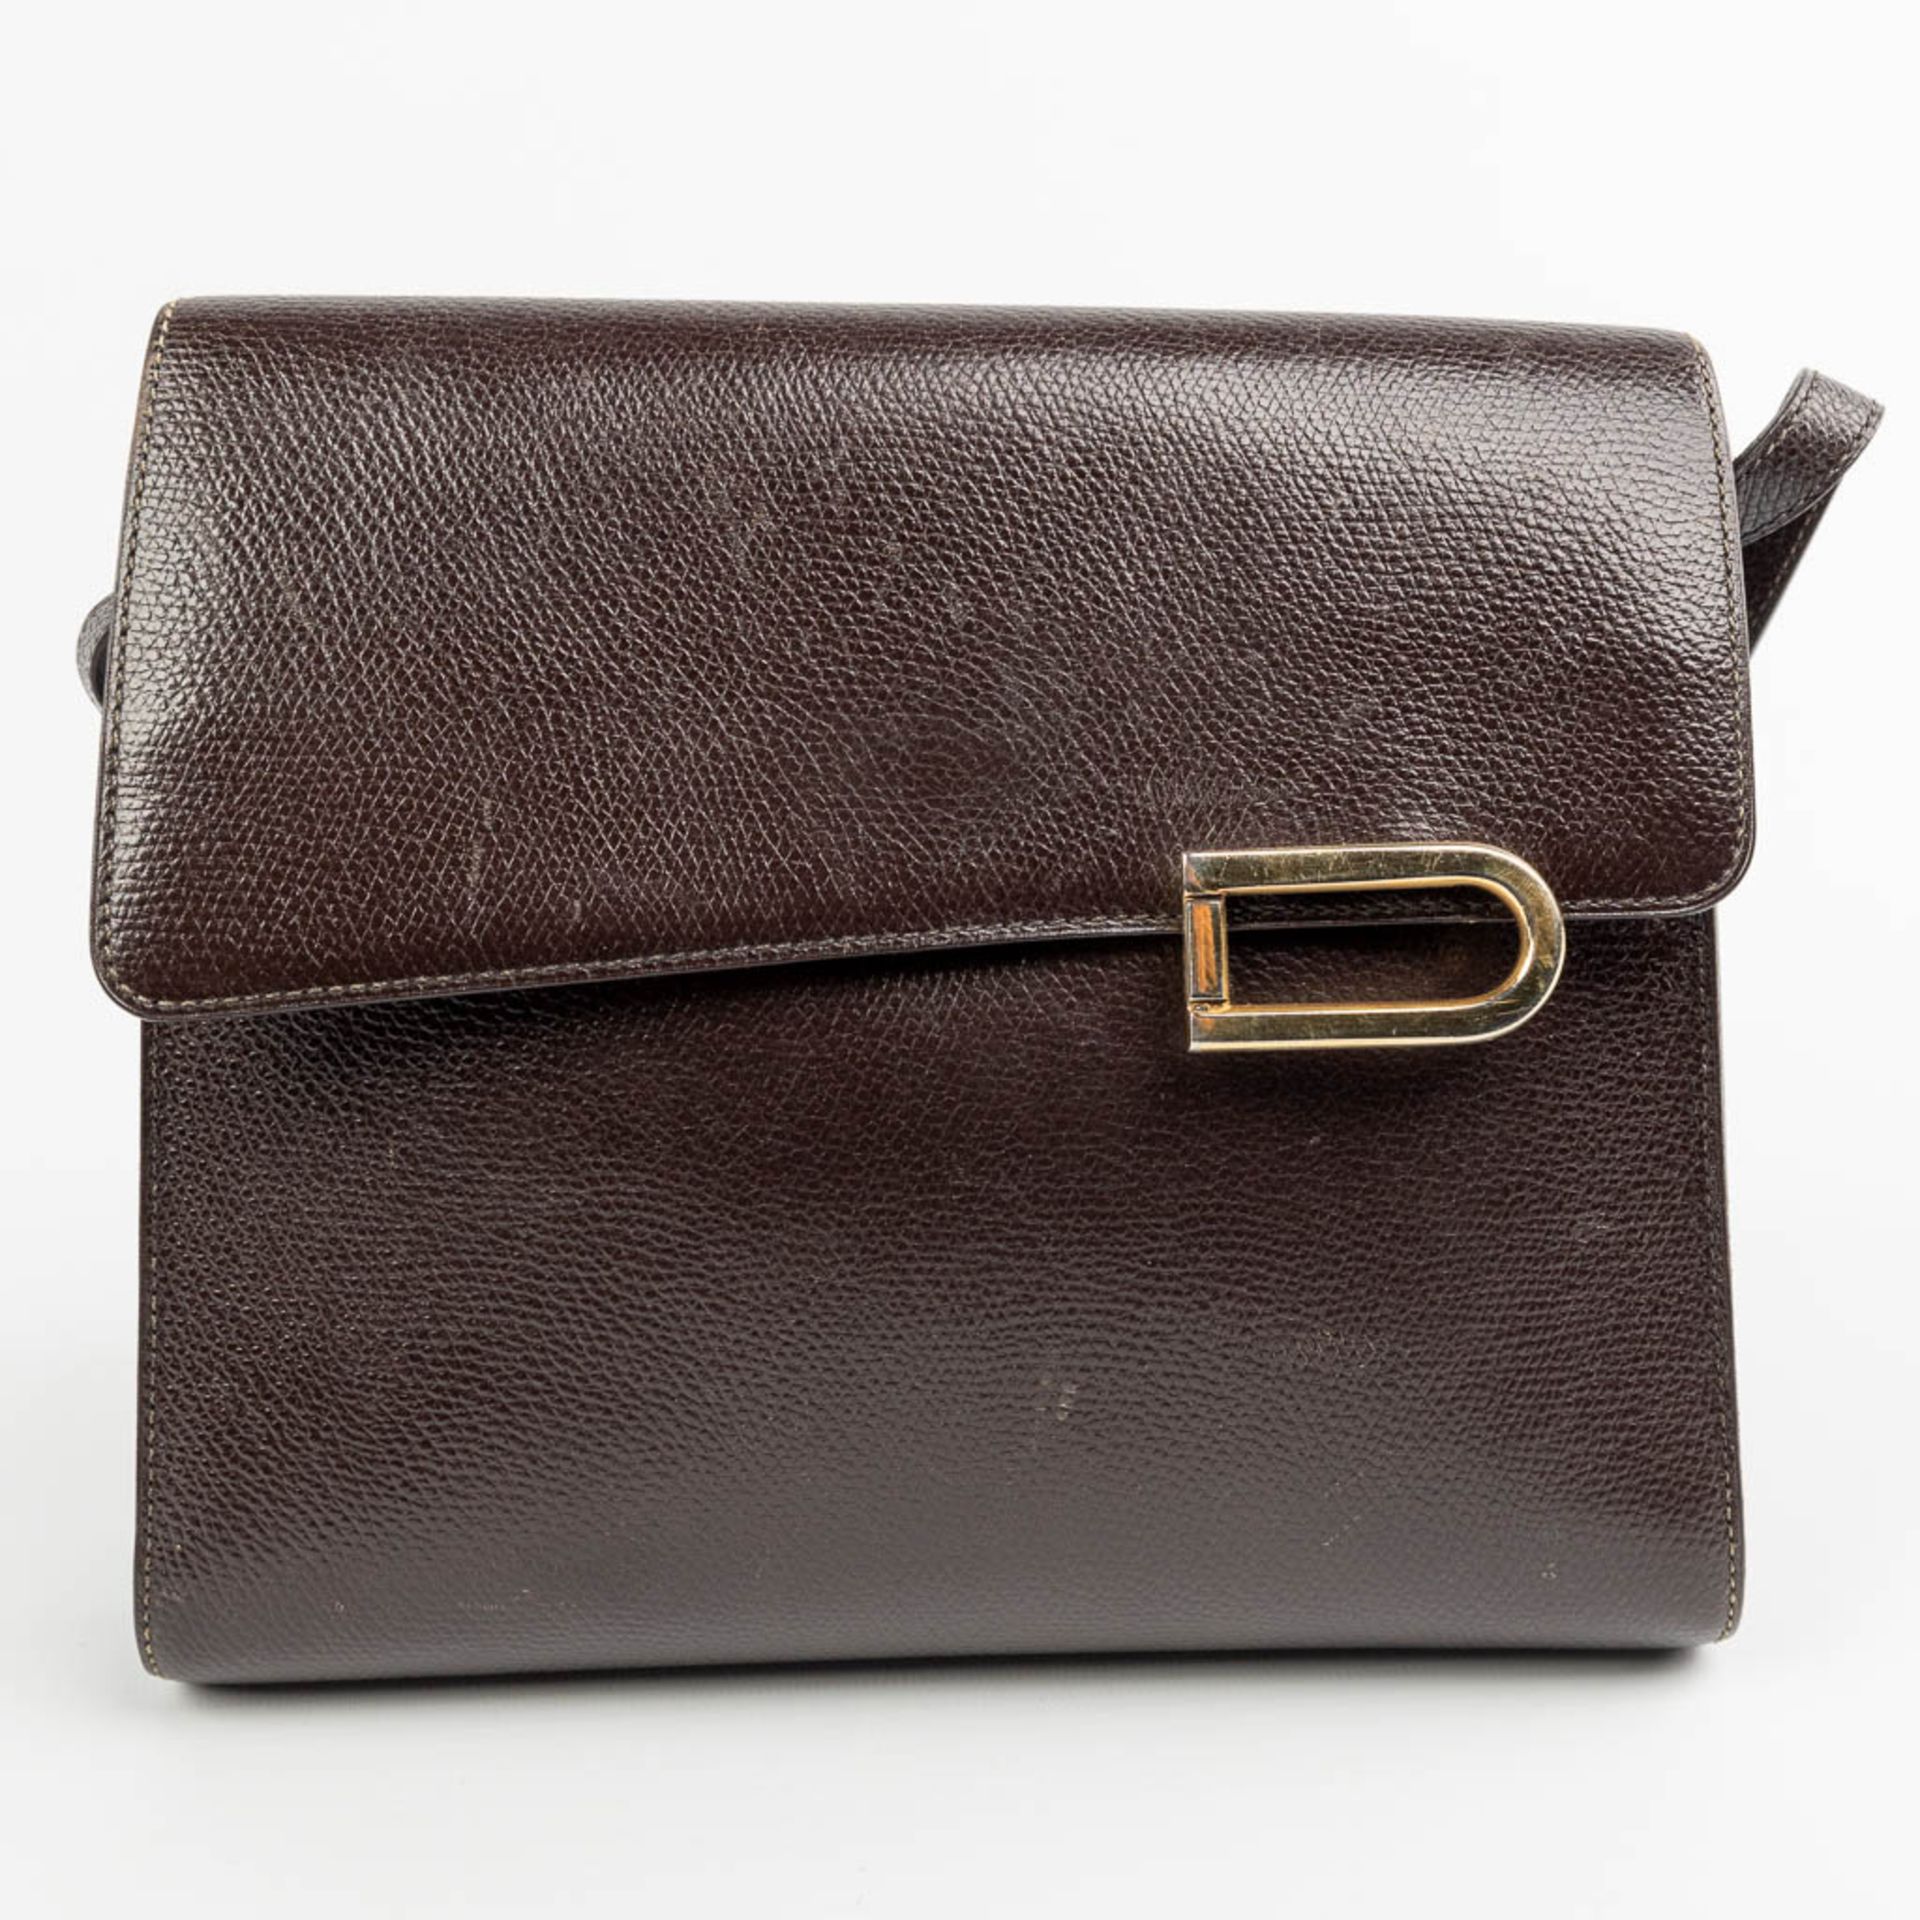 A purse made of brown leather and marked Delvaux. - Image 12 of 12